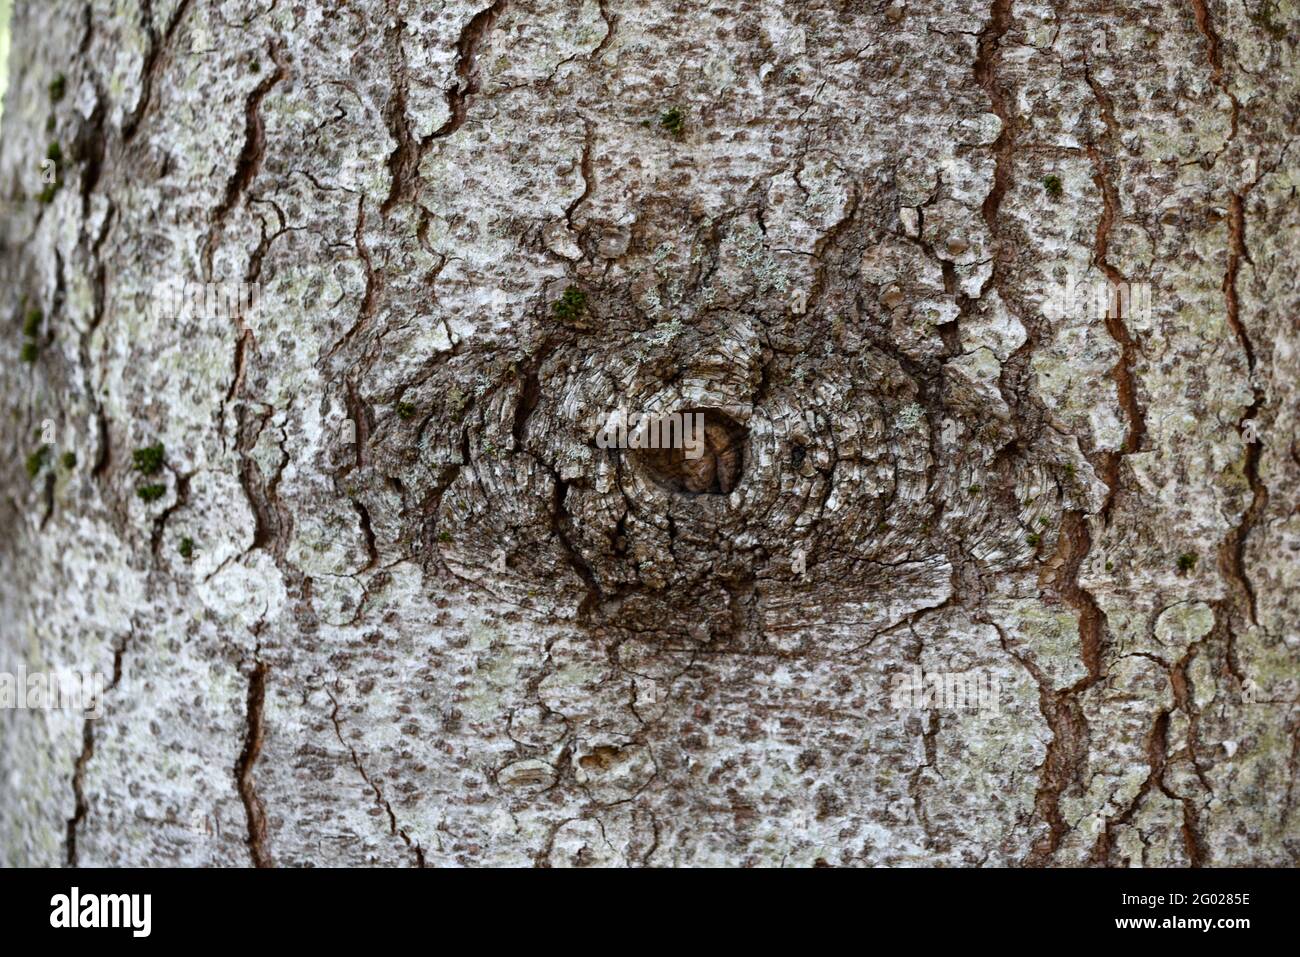 Natural Eye like Formation on Tree Trunk of Mountain Pine Pinus mugo Left By Wound of Broken or Fallen Branch Stock Photo